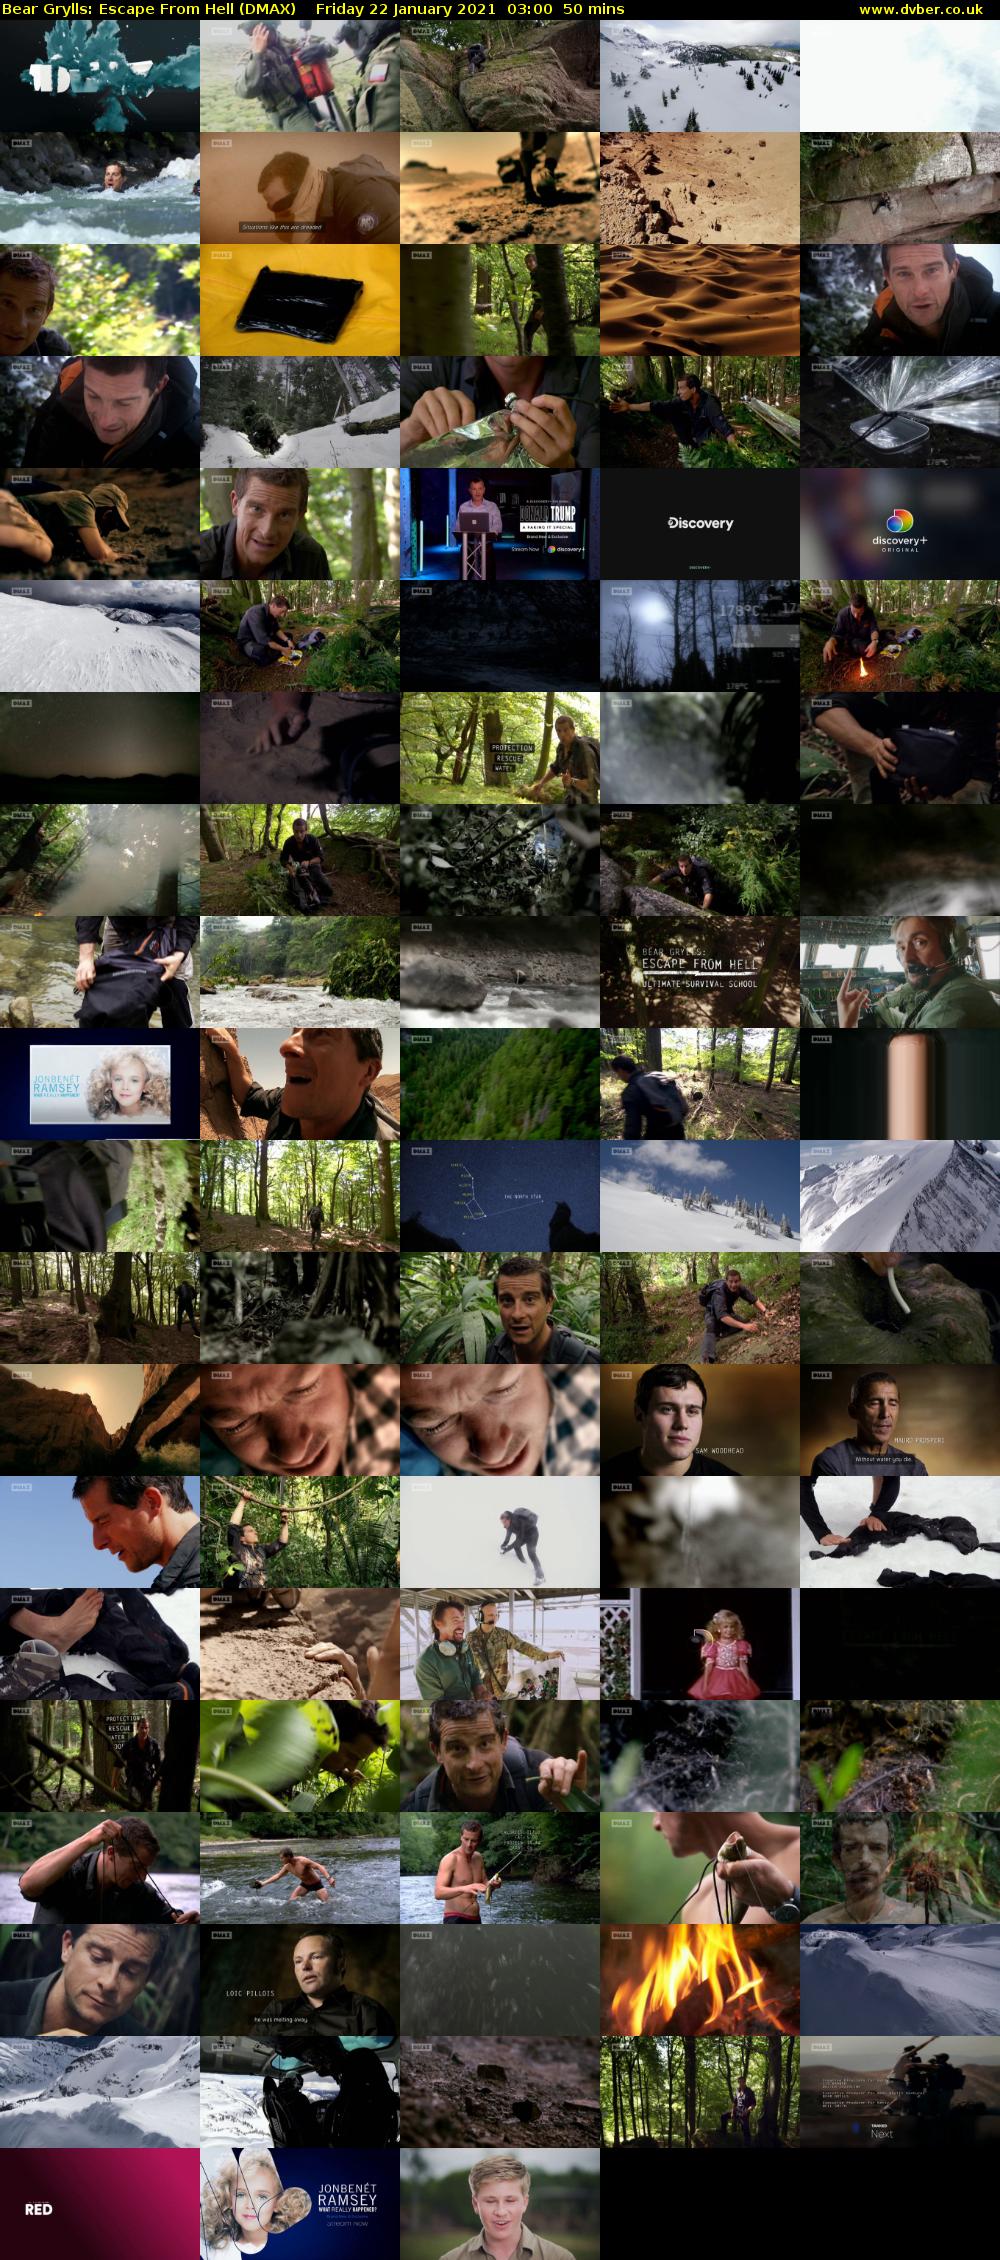 Bear Grylls: Escape From Hell (DMAX) Friday 22 January 2021 03:00 - 03:50